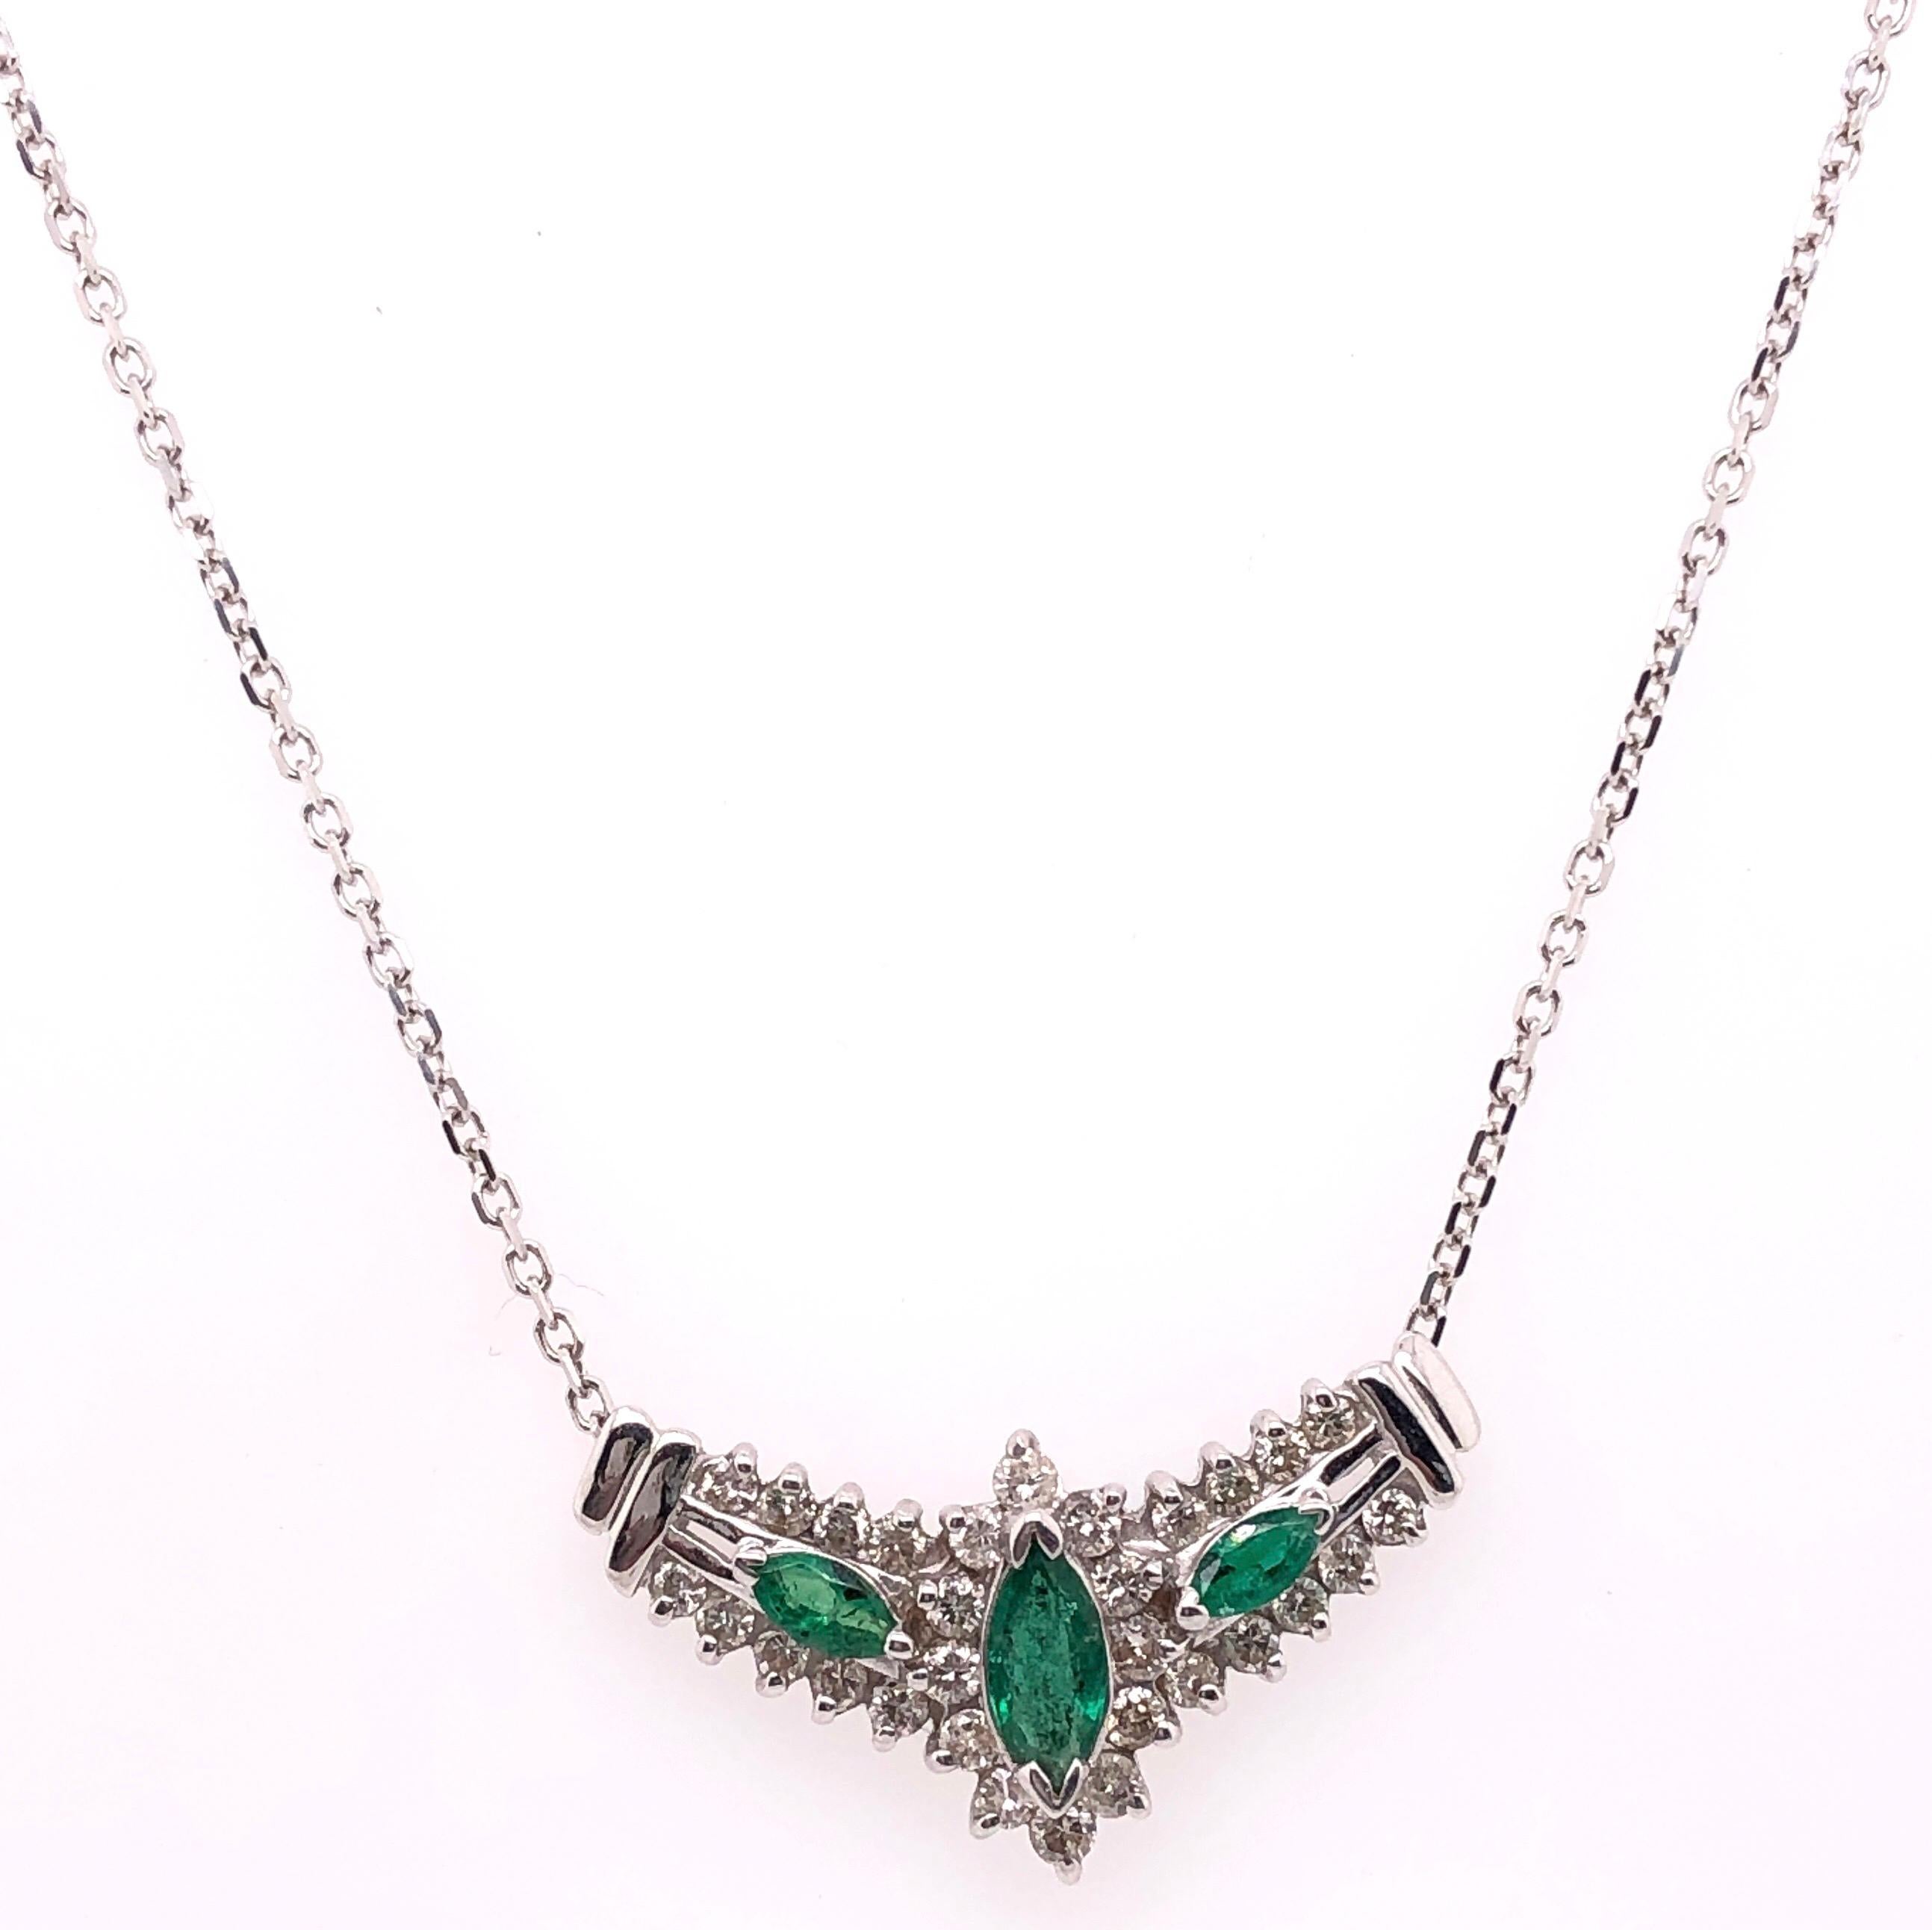 14 Karat White Gold Necklace with Soldered Diamond and Emerald Pendant 1